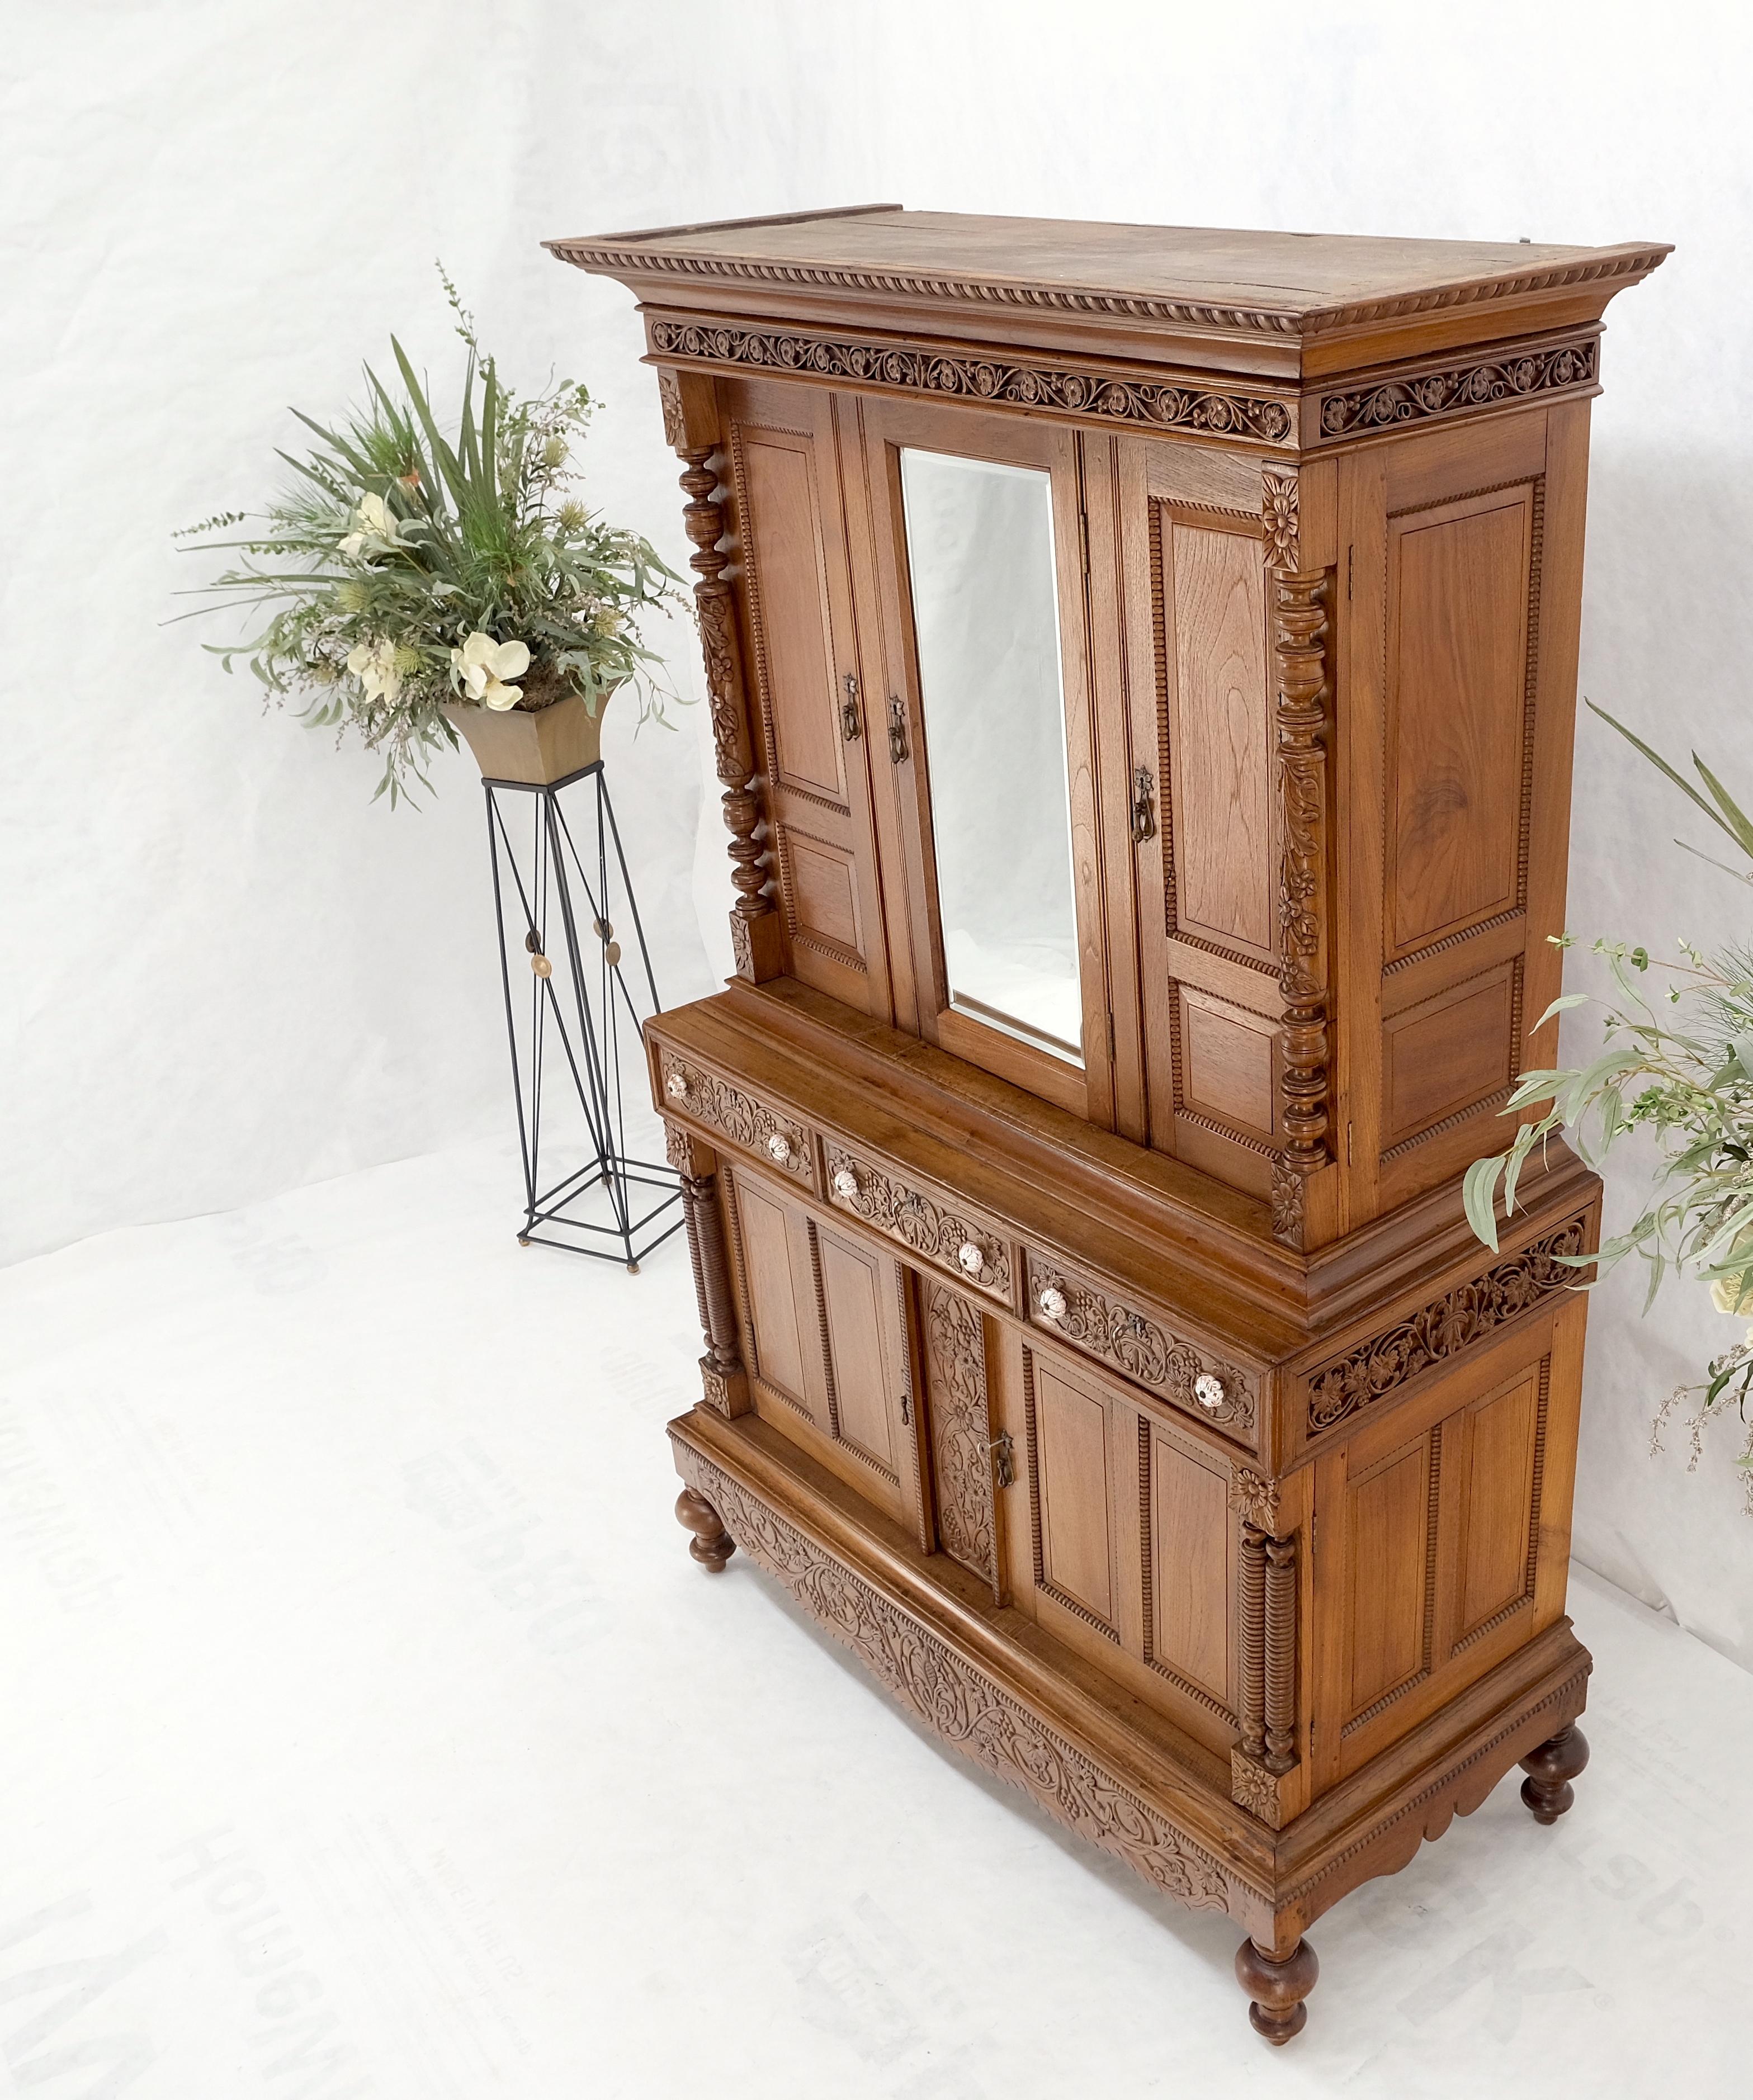 Solid carved teak antique two part cupboard cabinet with unique feature mint!
Please see the video featuring the unique secret or child proof drawer.
Cabinet is beautifully polished and has very gorgeous amber tone solid teak color.